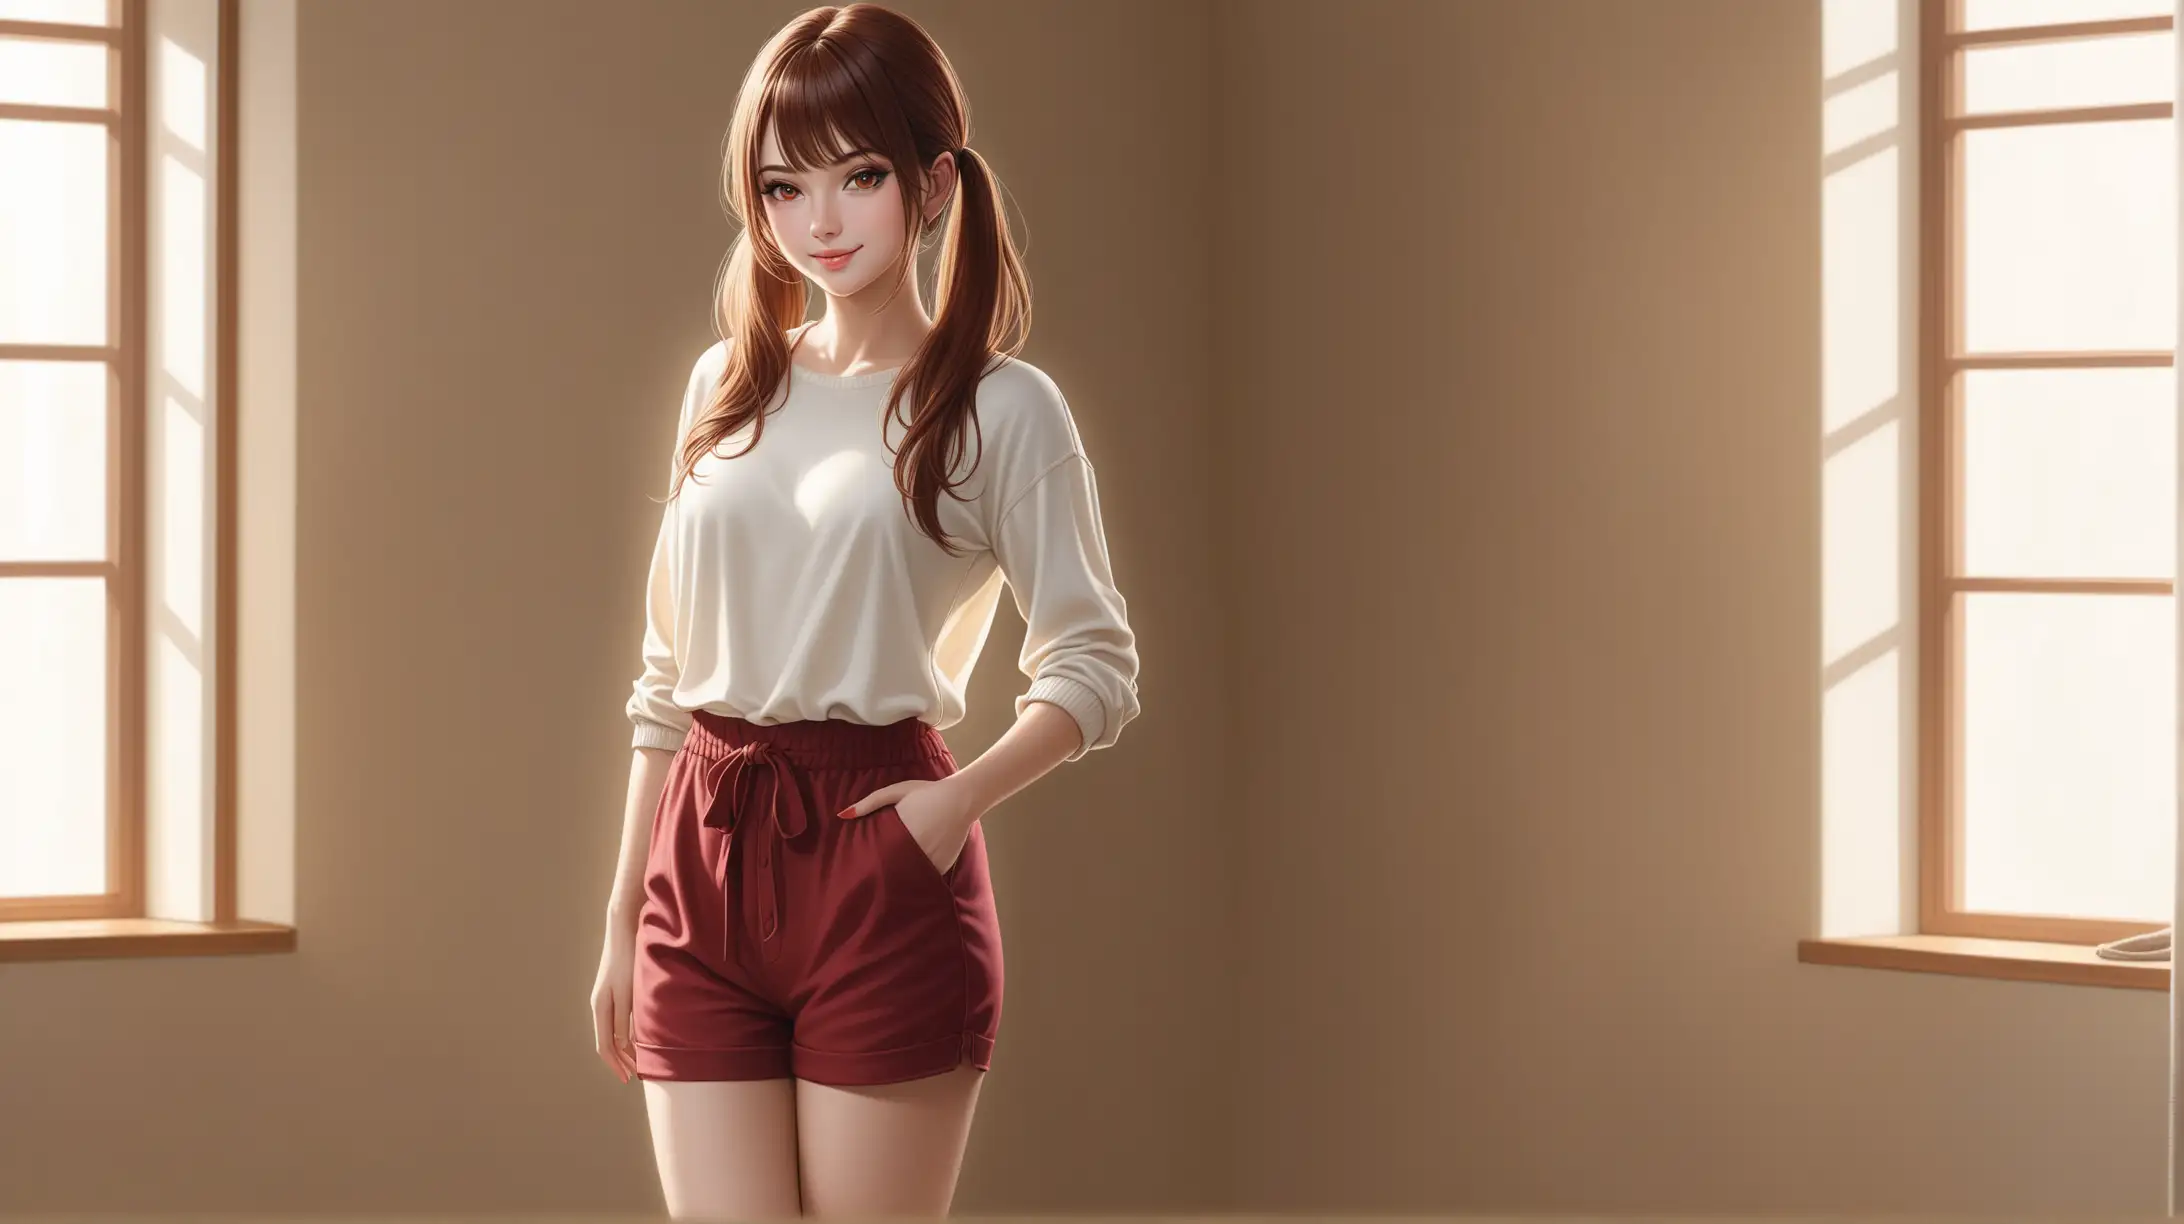 Draw a woman, very long reddish-brown hair that goes past waist, twintails, side locks, side-swept bangs, scarlet eyes, perky figure, high quality, realistic, accurate, detailed, long shot, natural lighting, indoors, full body, standing, casual outfit, seductive pose, smiling at the viewer